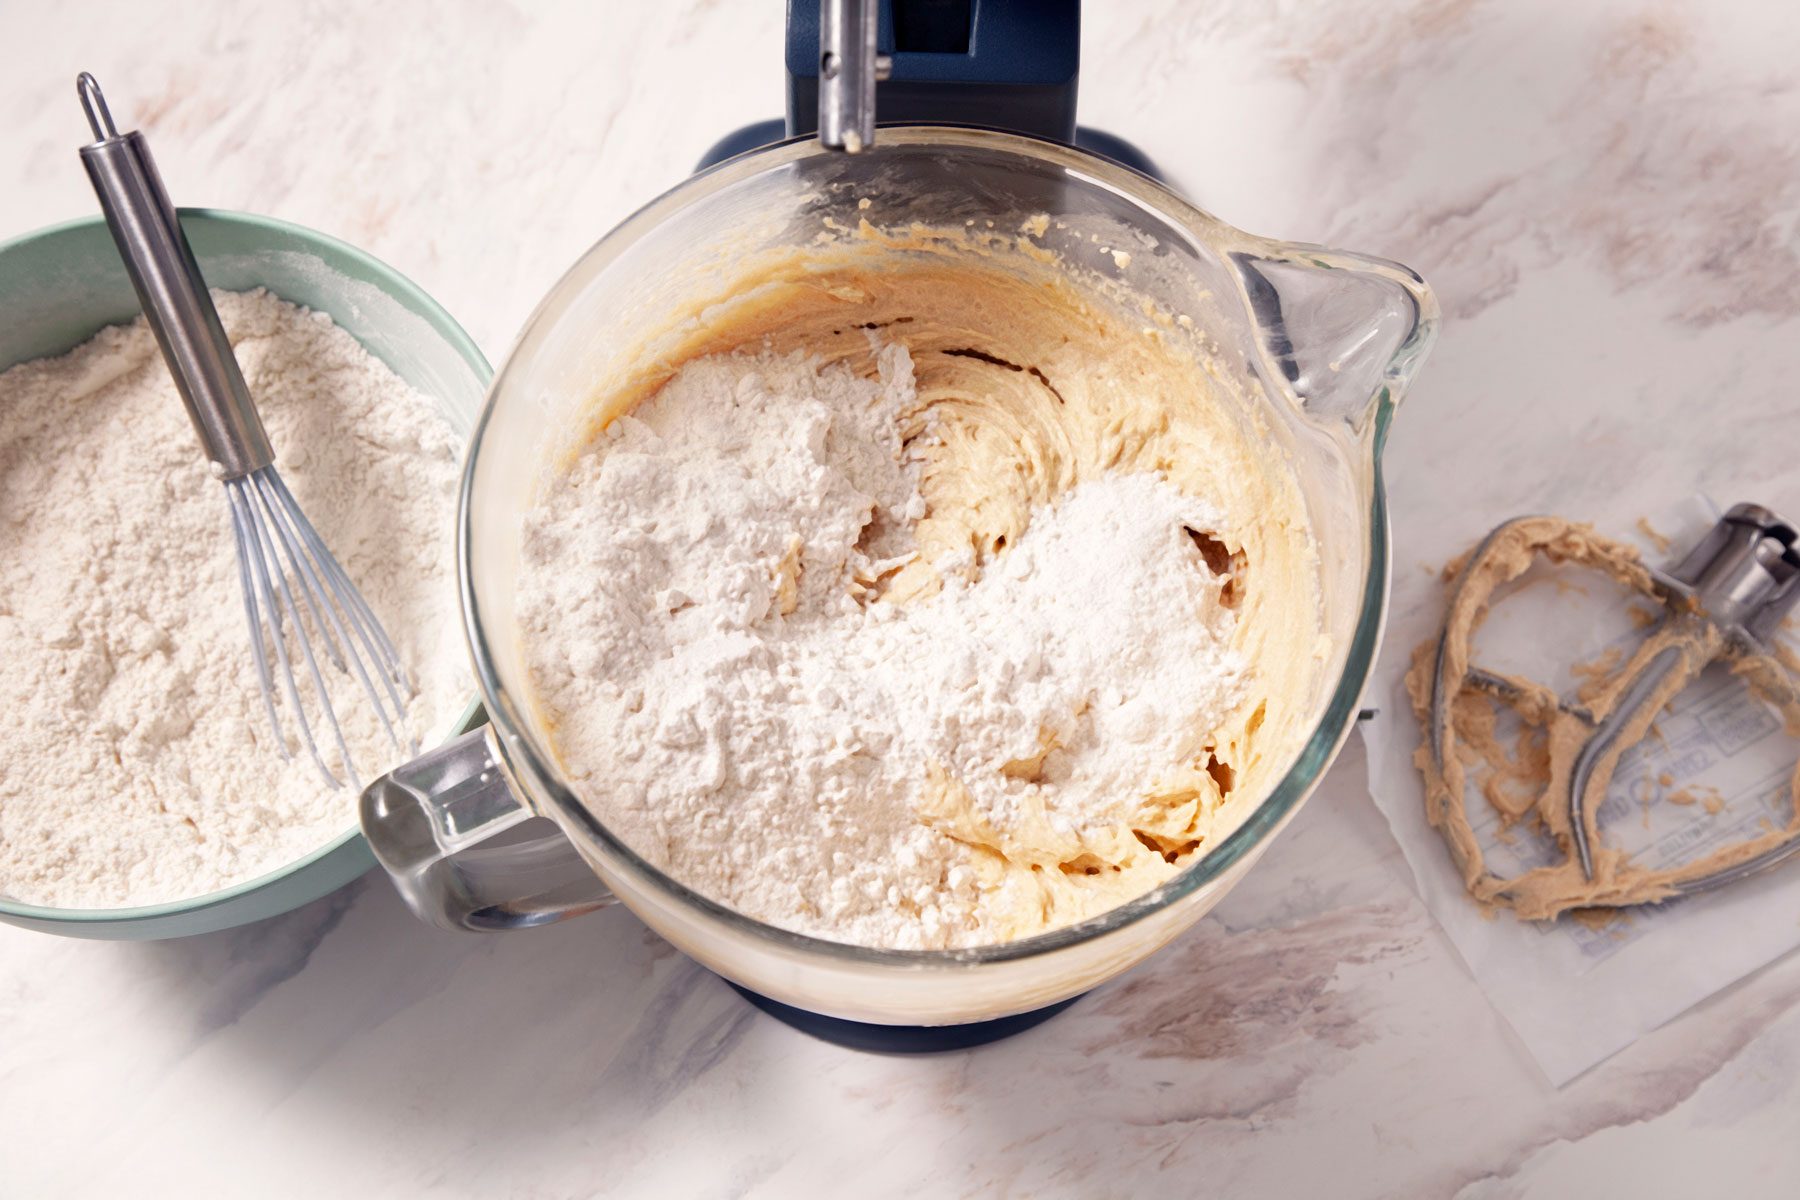 Mixing the flour into the creamed mixture in a blender